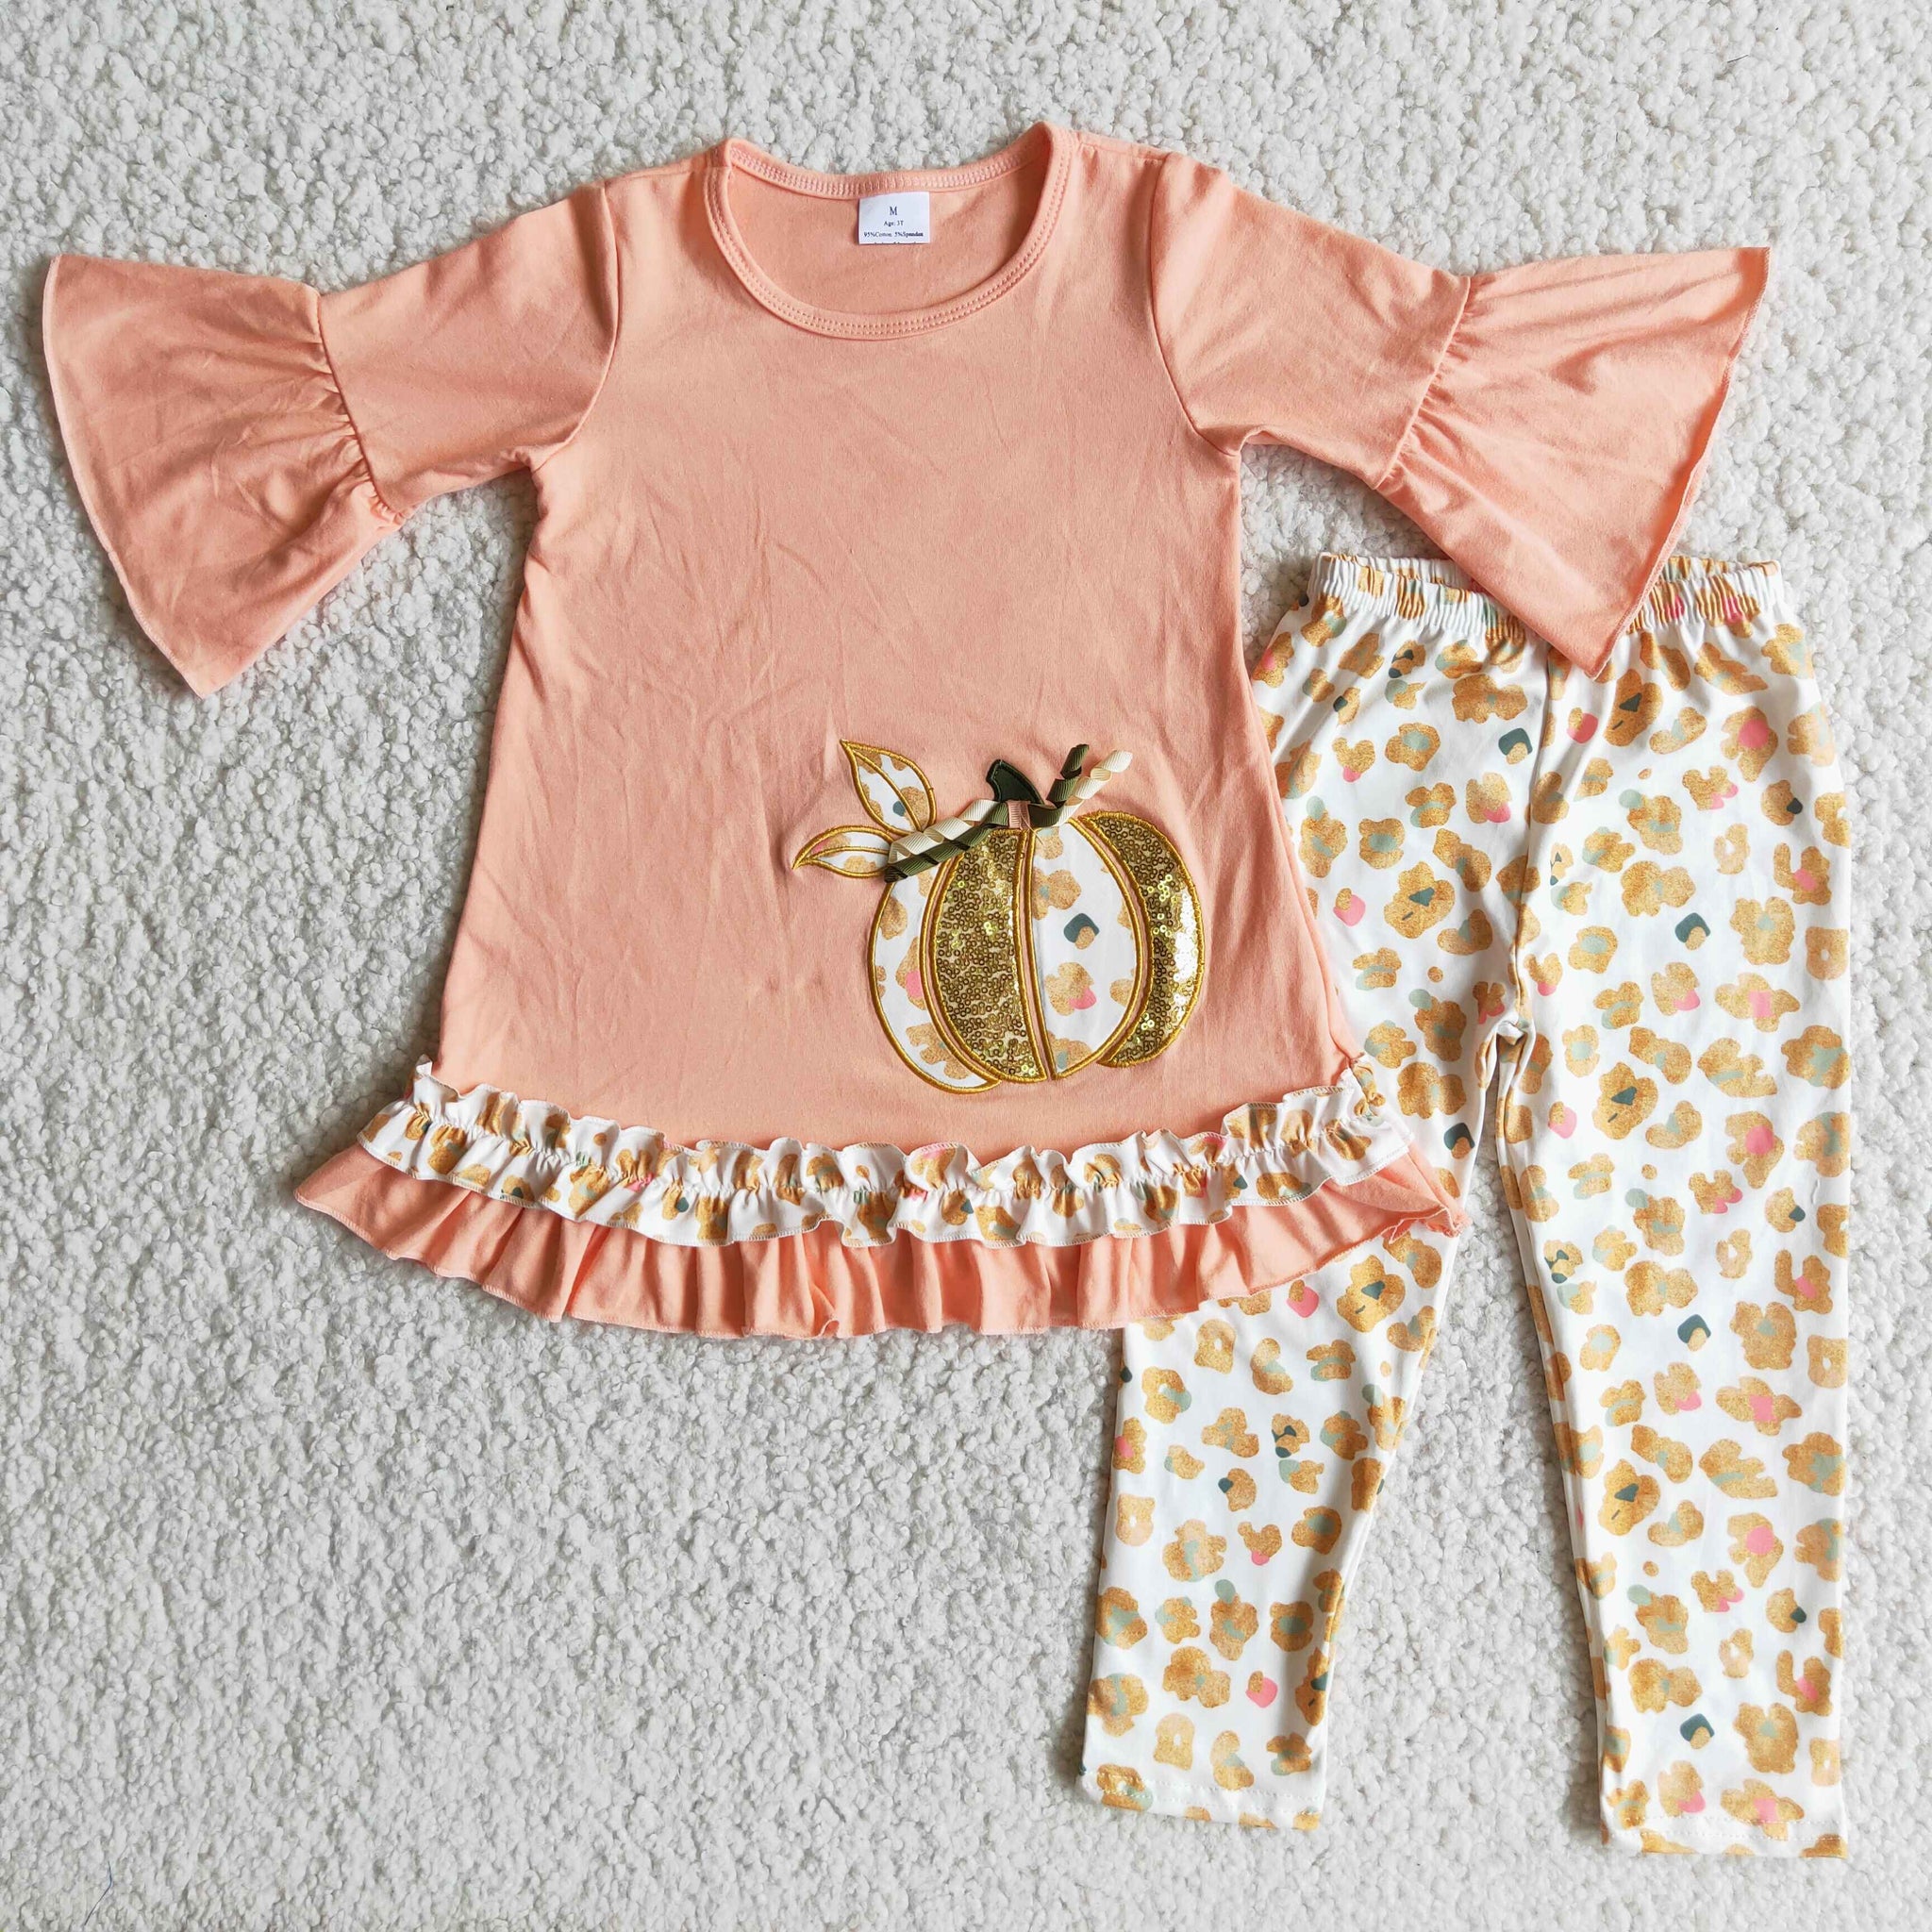 6 A9-30 baby girl clothes pumpkin embroidery girl halloween outfit